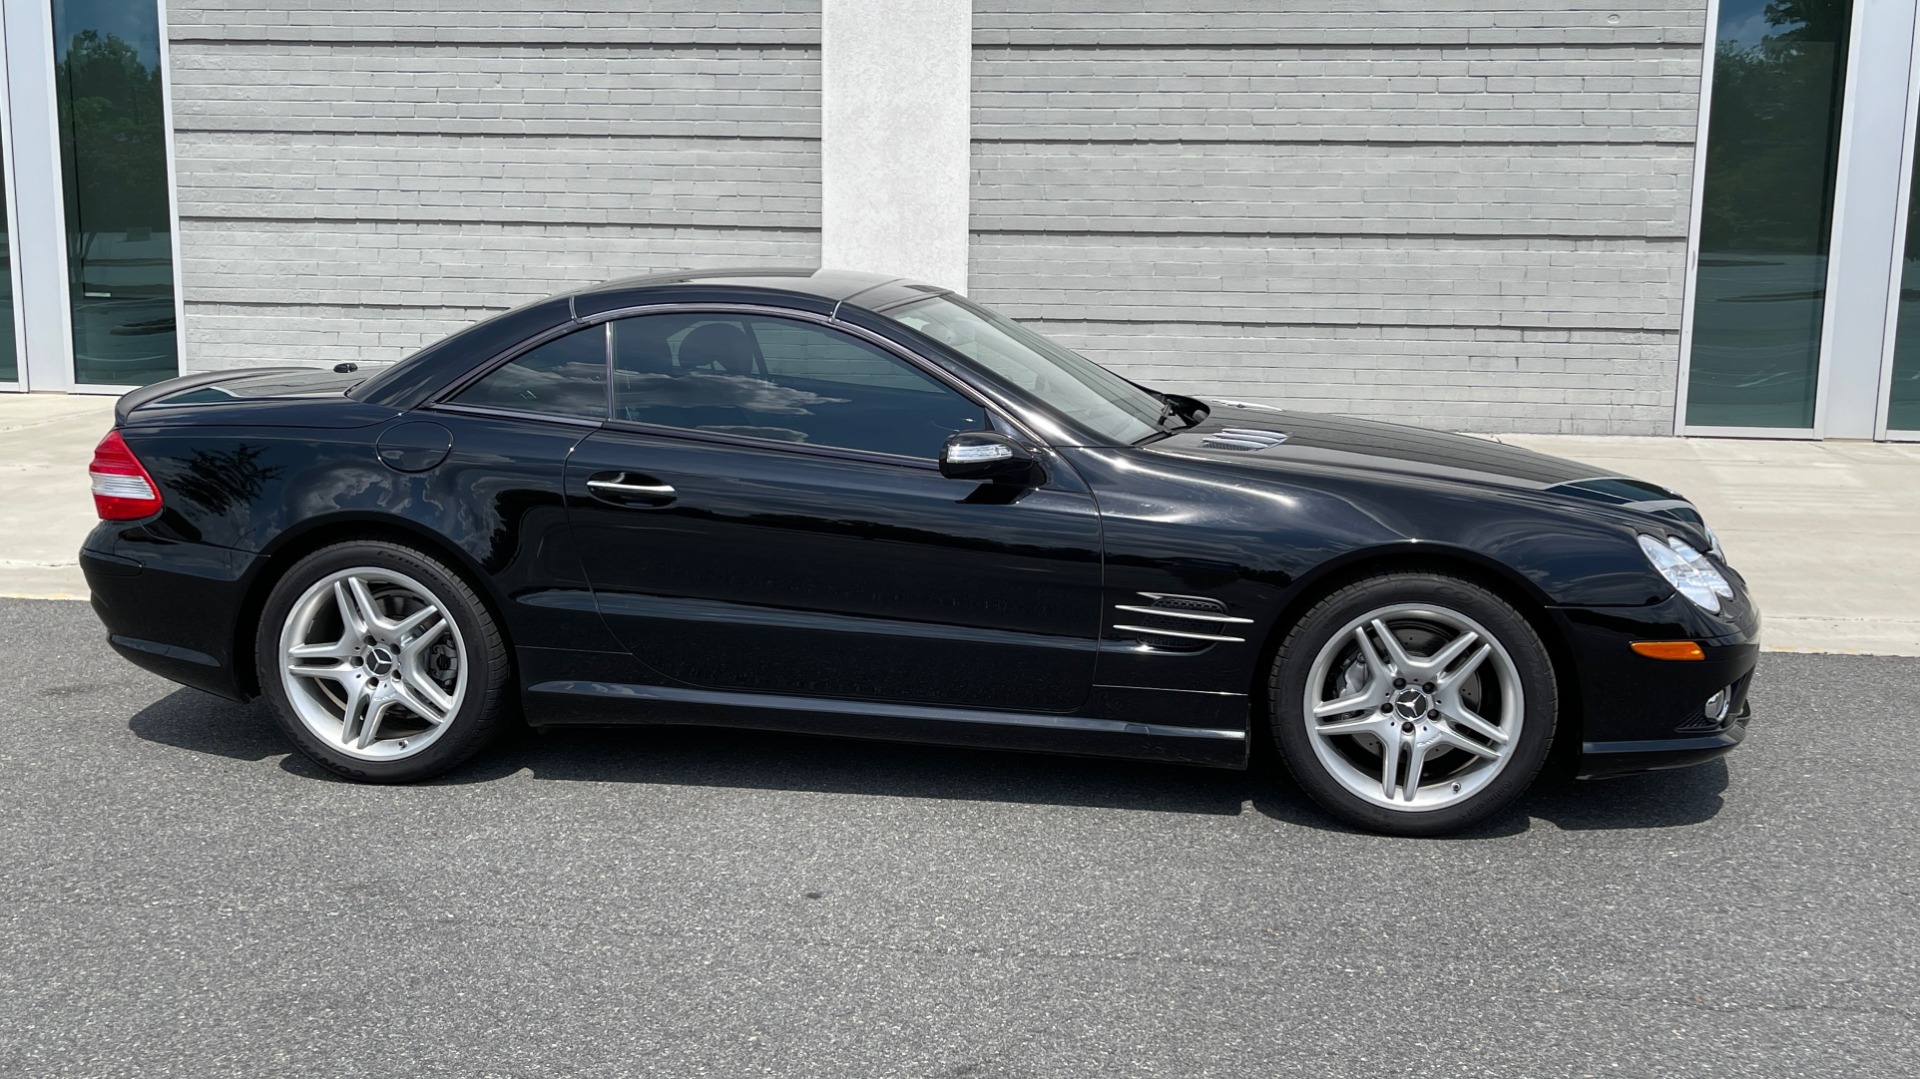 Used 2007 Mercedes-Benz SL-Class 5.5L V8 for sale $18,995 at Formula Imports in Charlotte NC 28227 8